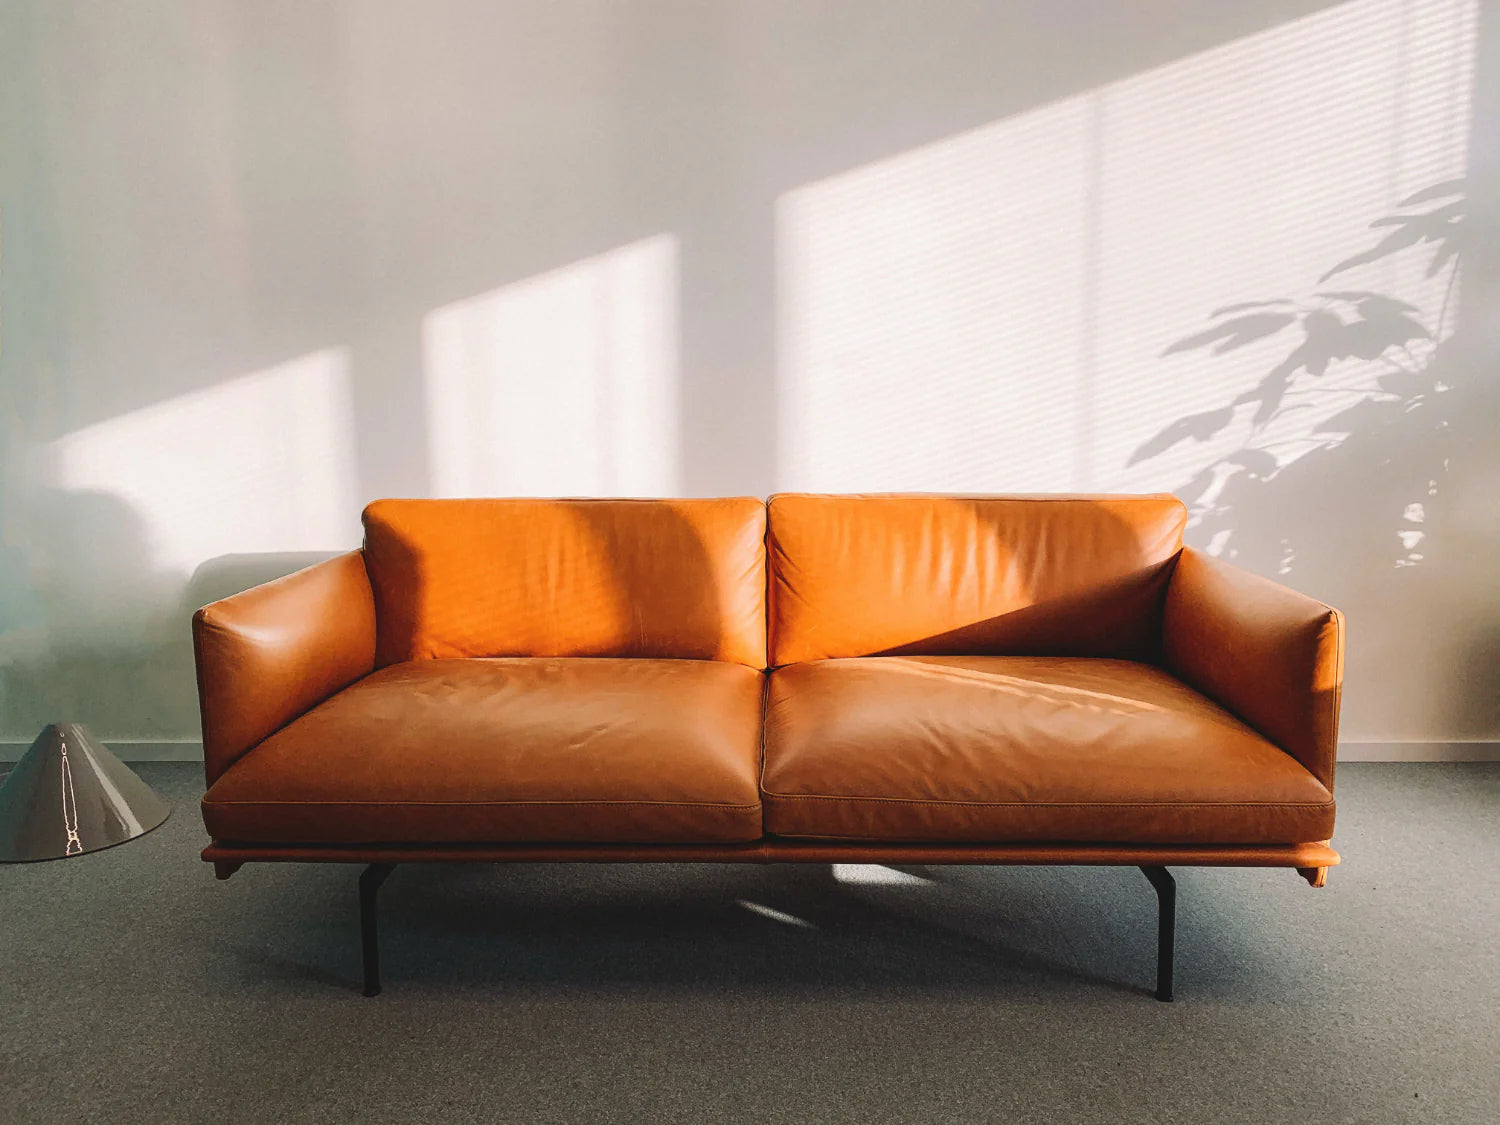 A brown leather couch in an empty room